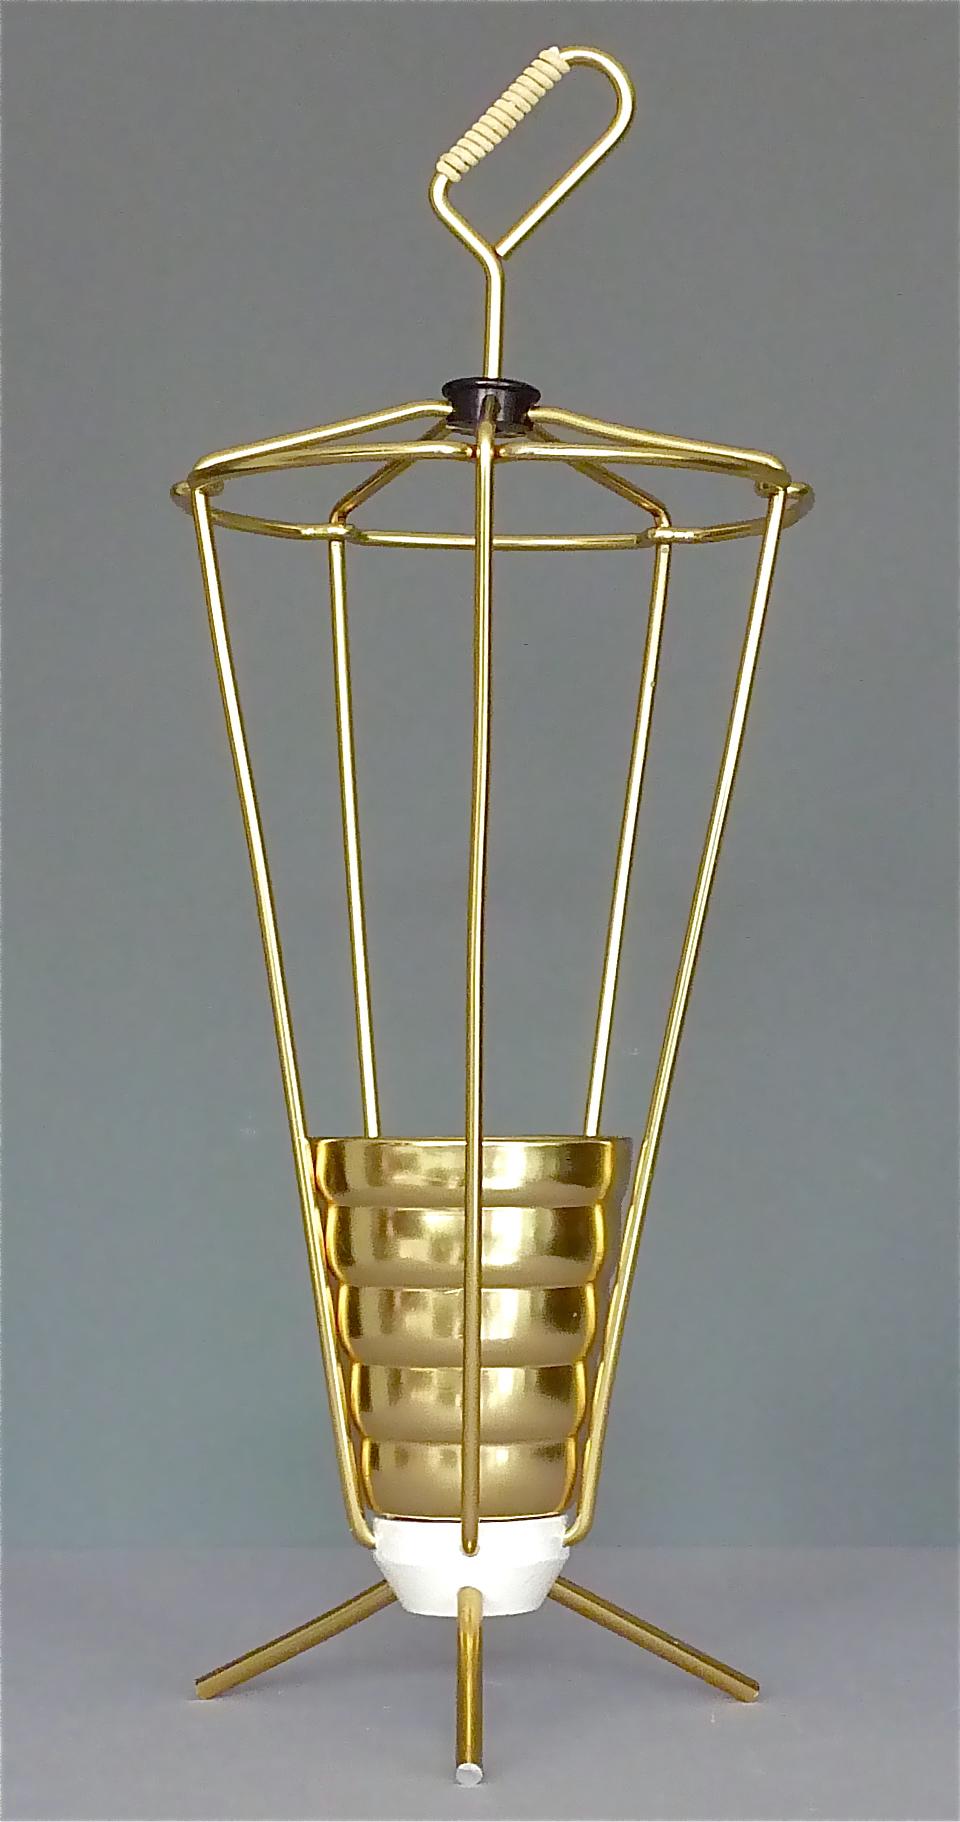 Nice Italian 1950s golden tripod umbrella stand. Golden anodized aluminum umbrella stand with white enameled iron weighted sputnik base, a golden beaker as raindrop-catcher and white plastic cord wrapping around the handle. Very good condition with